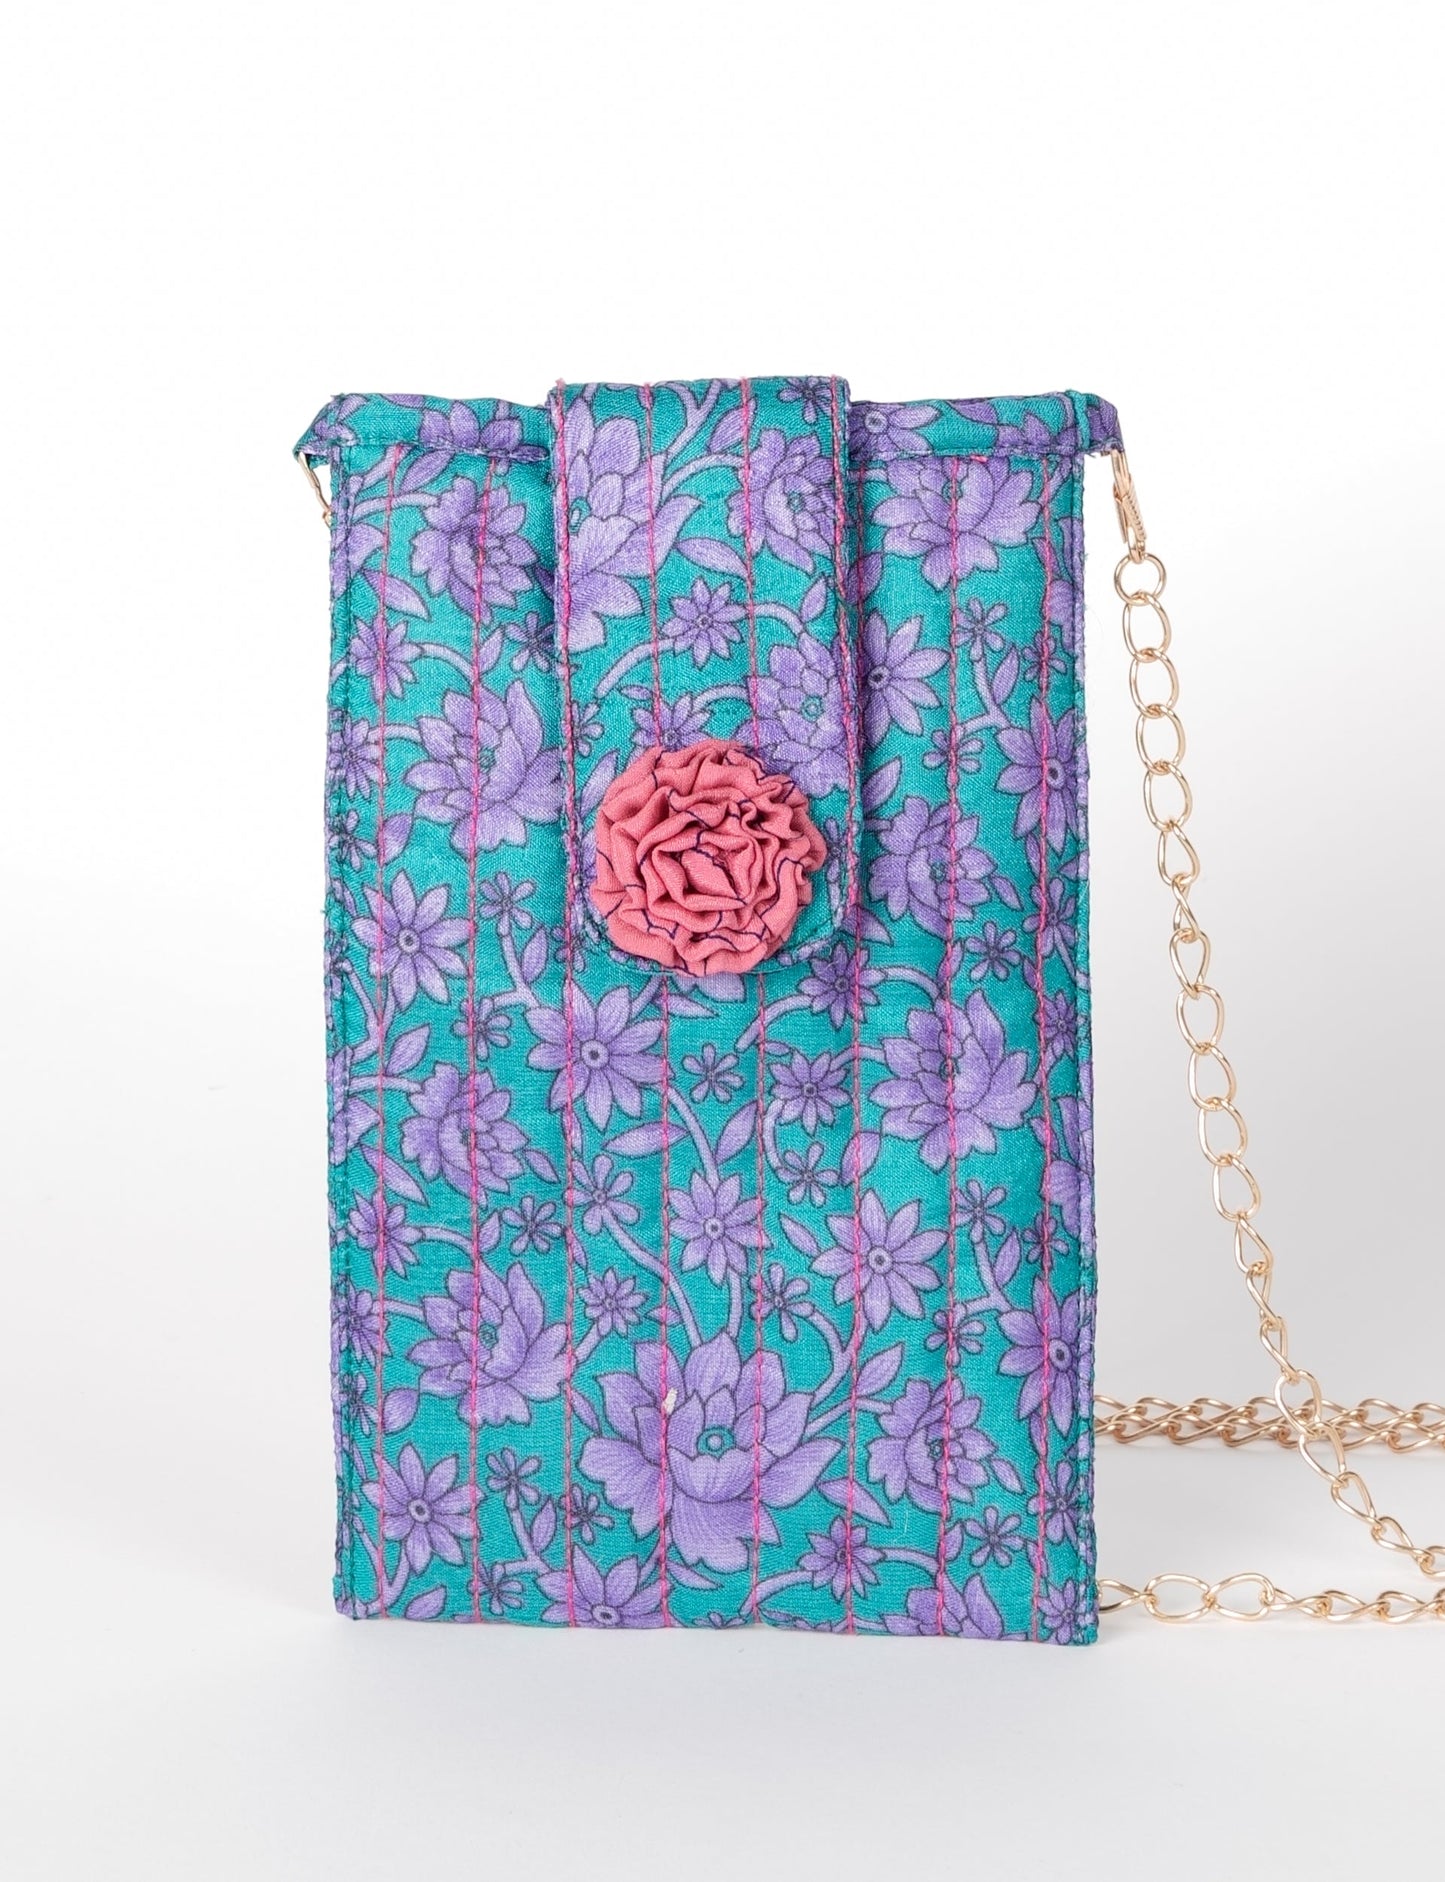 Stylish mobile phone pouch with florette embellishment. Made from sustainable materials for eco-friendly fashion.